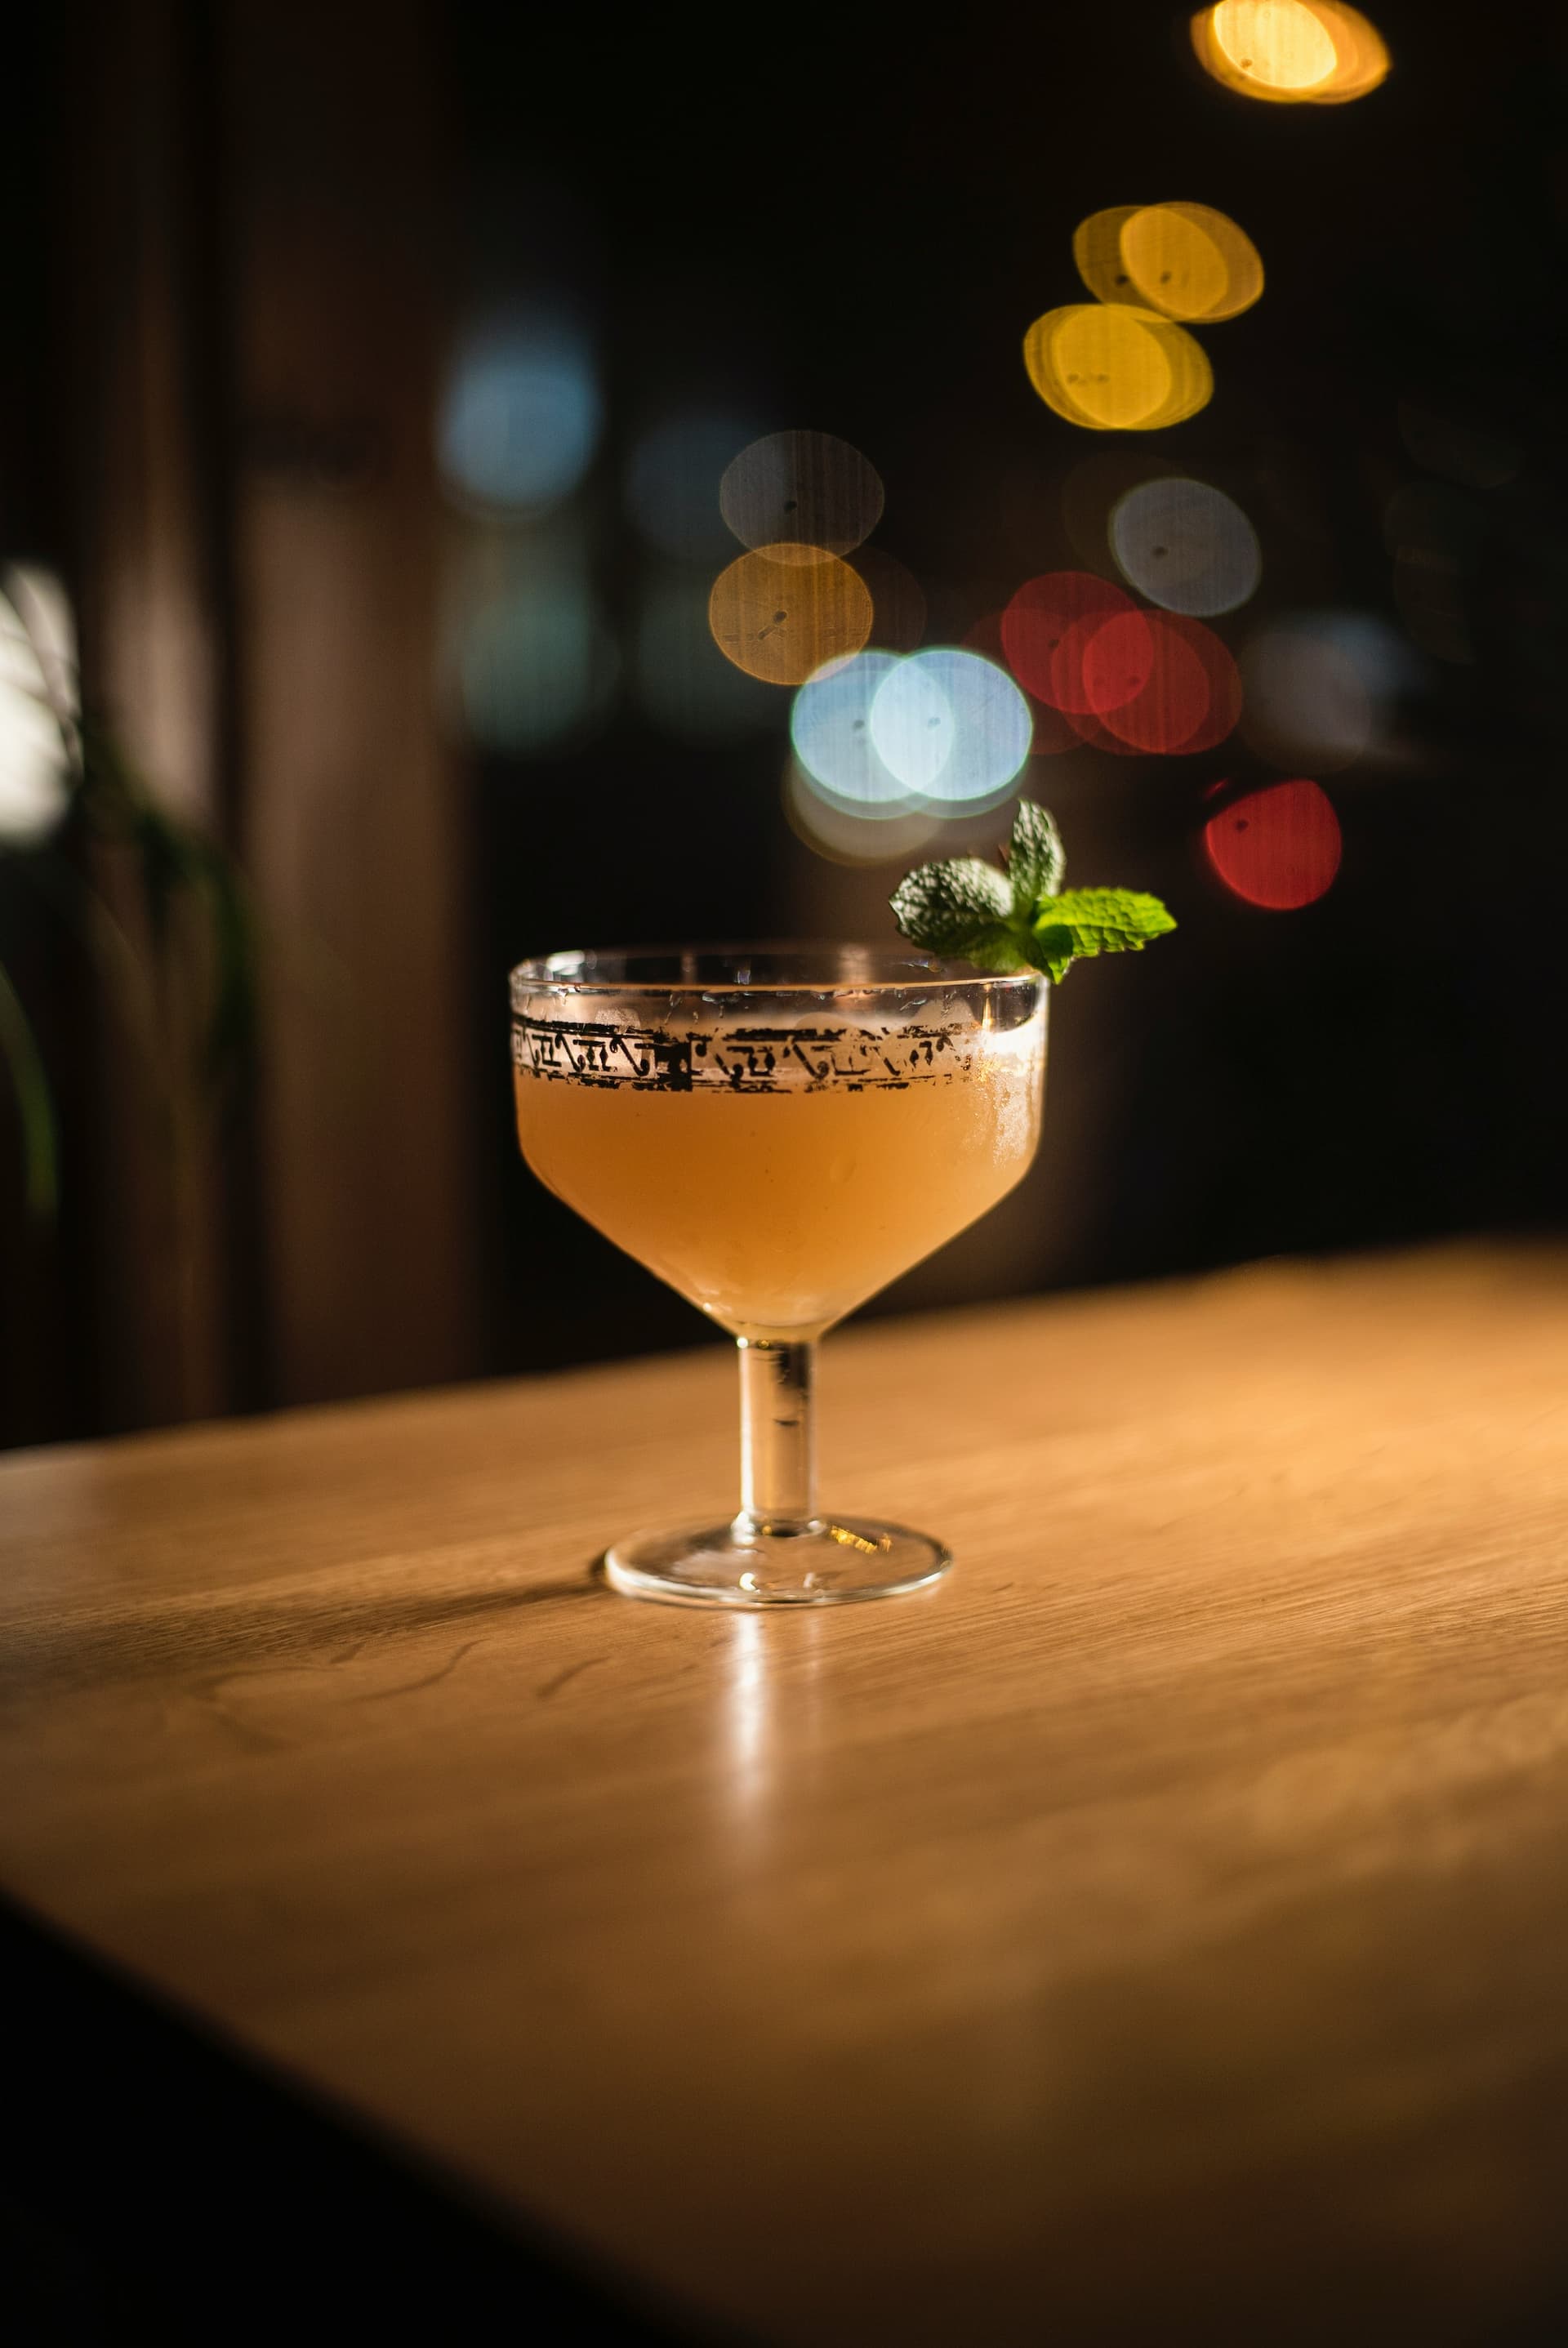 Classic Amaretto Sour With A Twist: Elevating The Almond Flavours